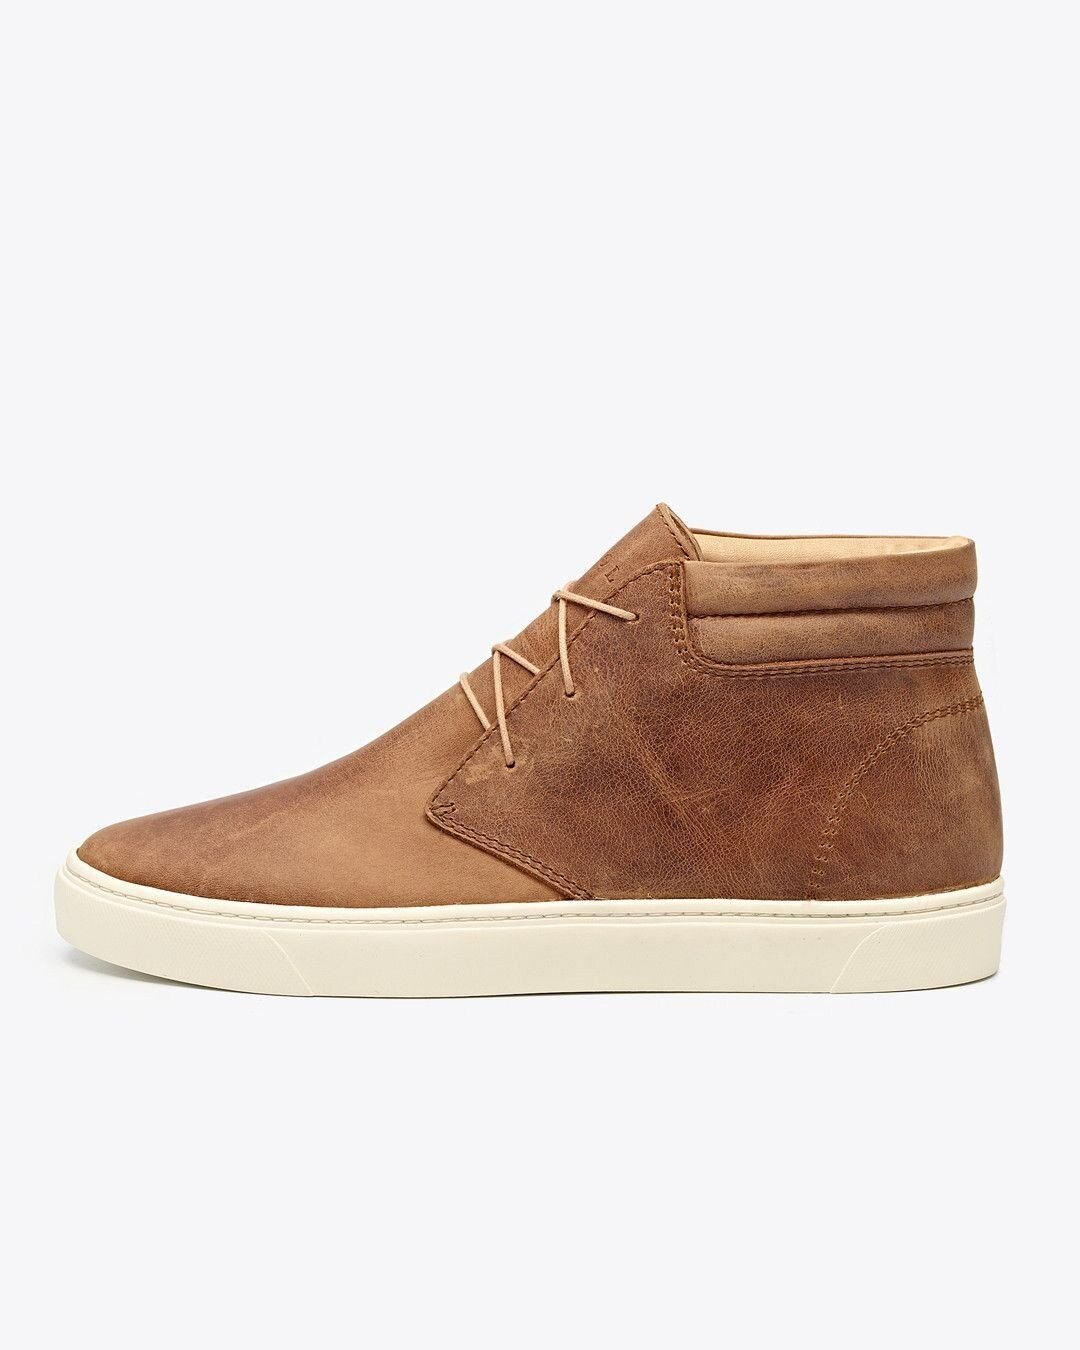 $160 | Leather Sneakers